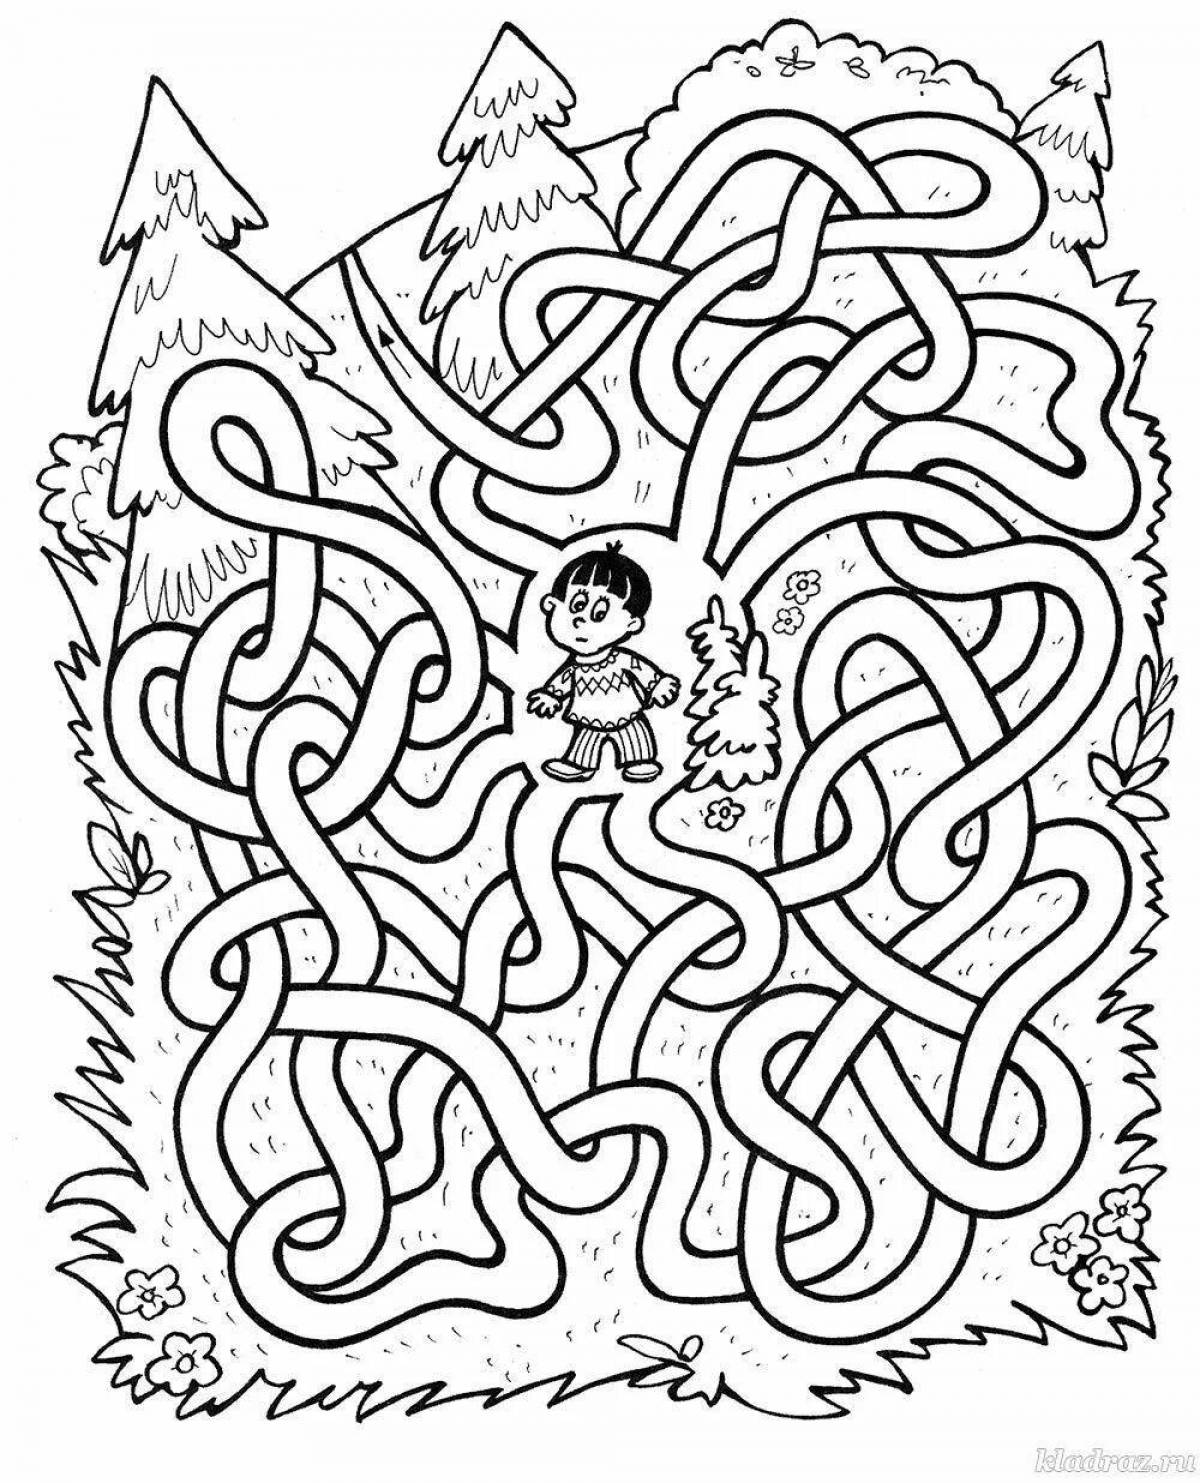 Stimulating maze coloring book for 10 year olds